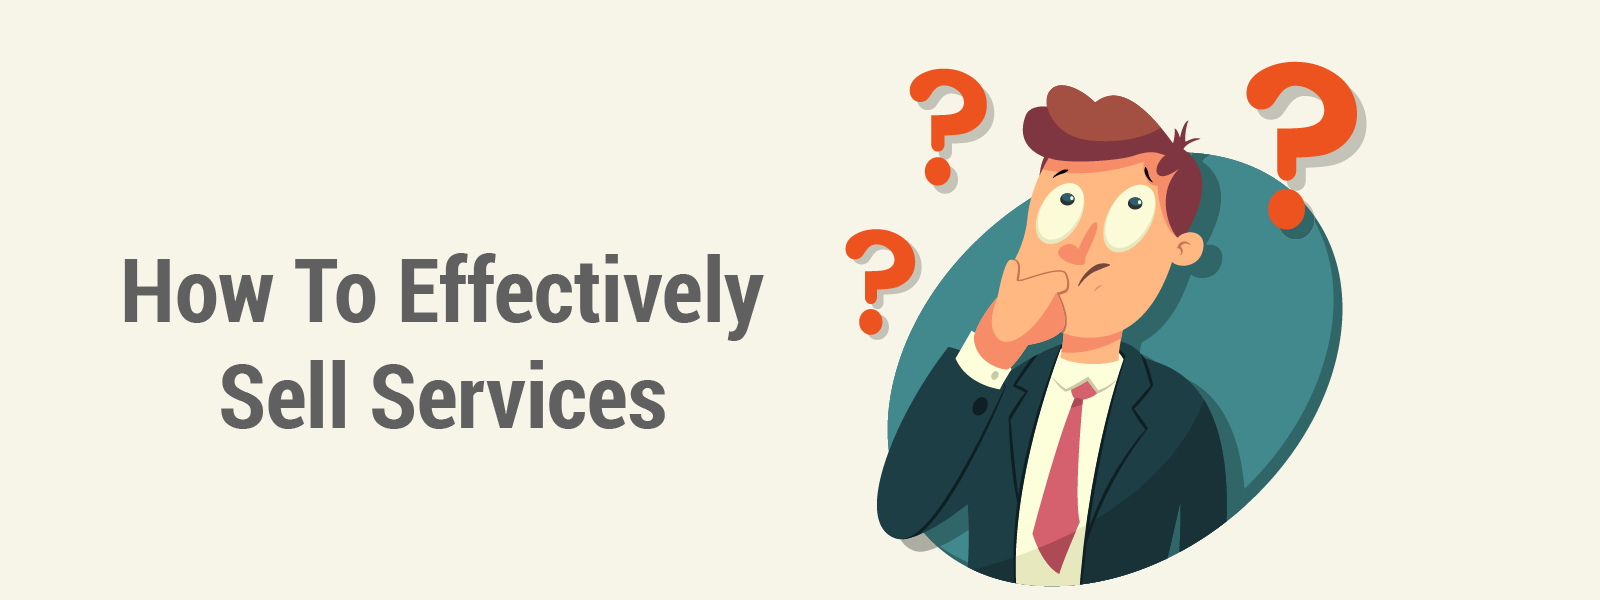 How To Effectively Sell Services